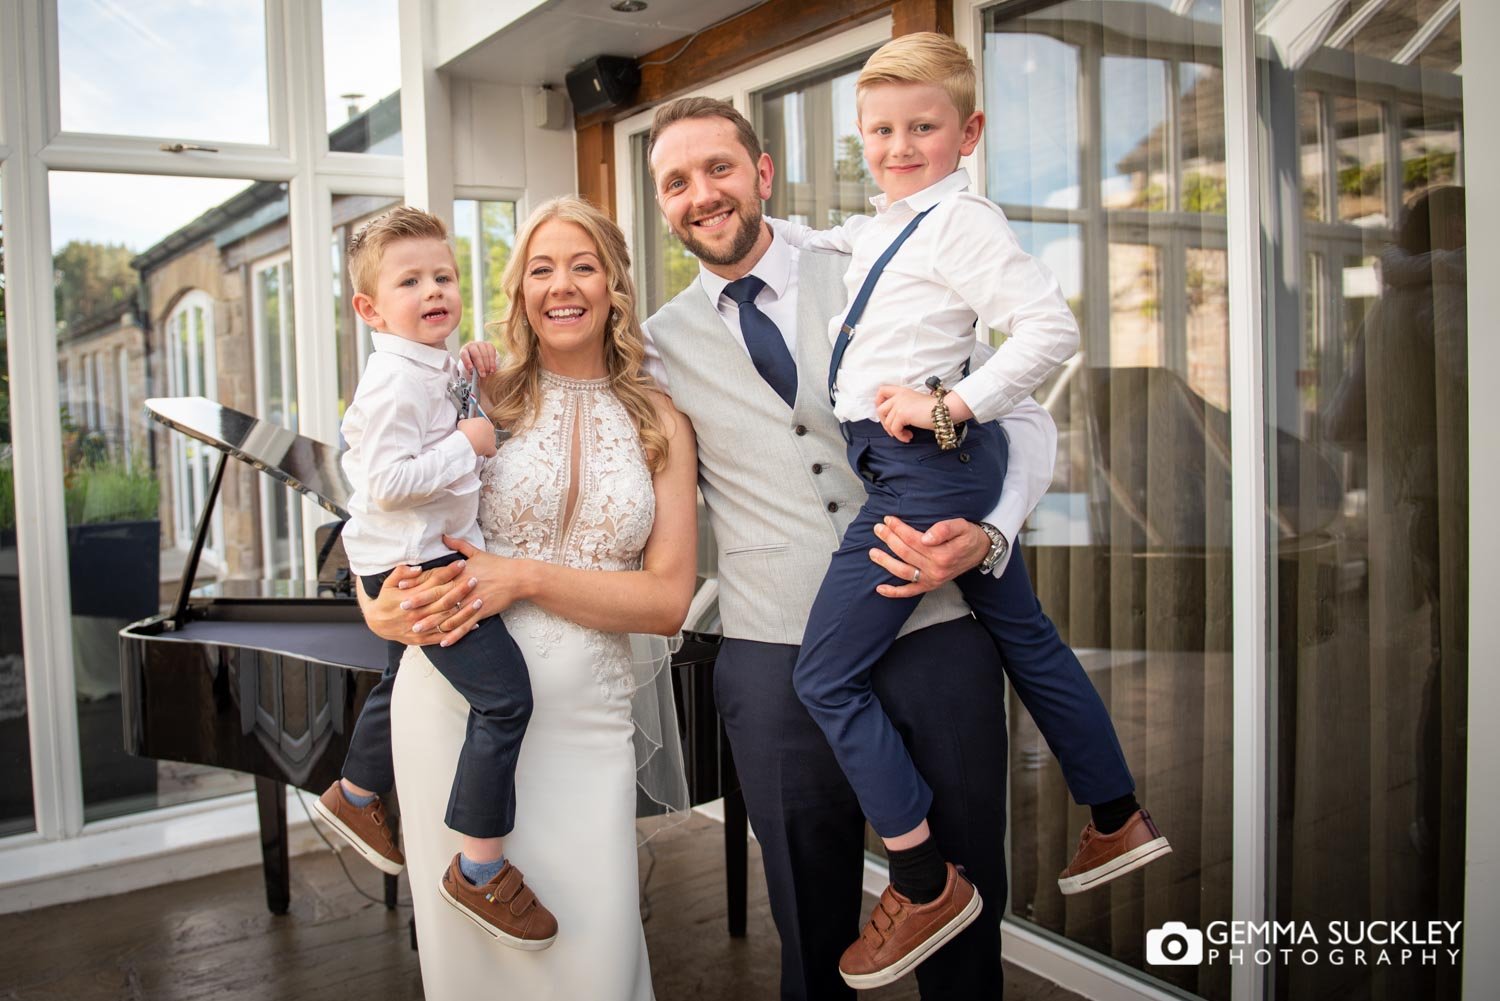 family wedding photo at coniston hotel in skipton